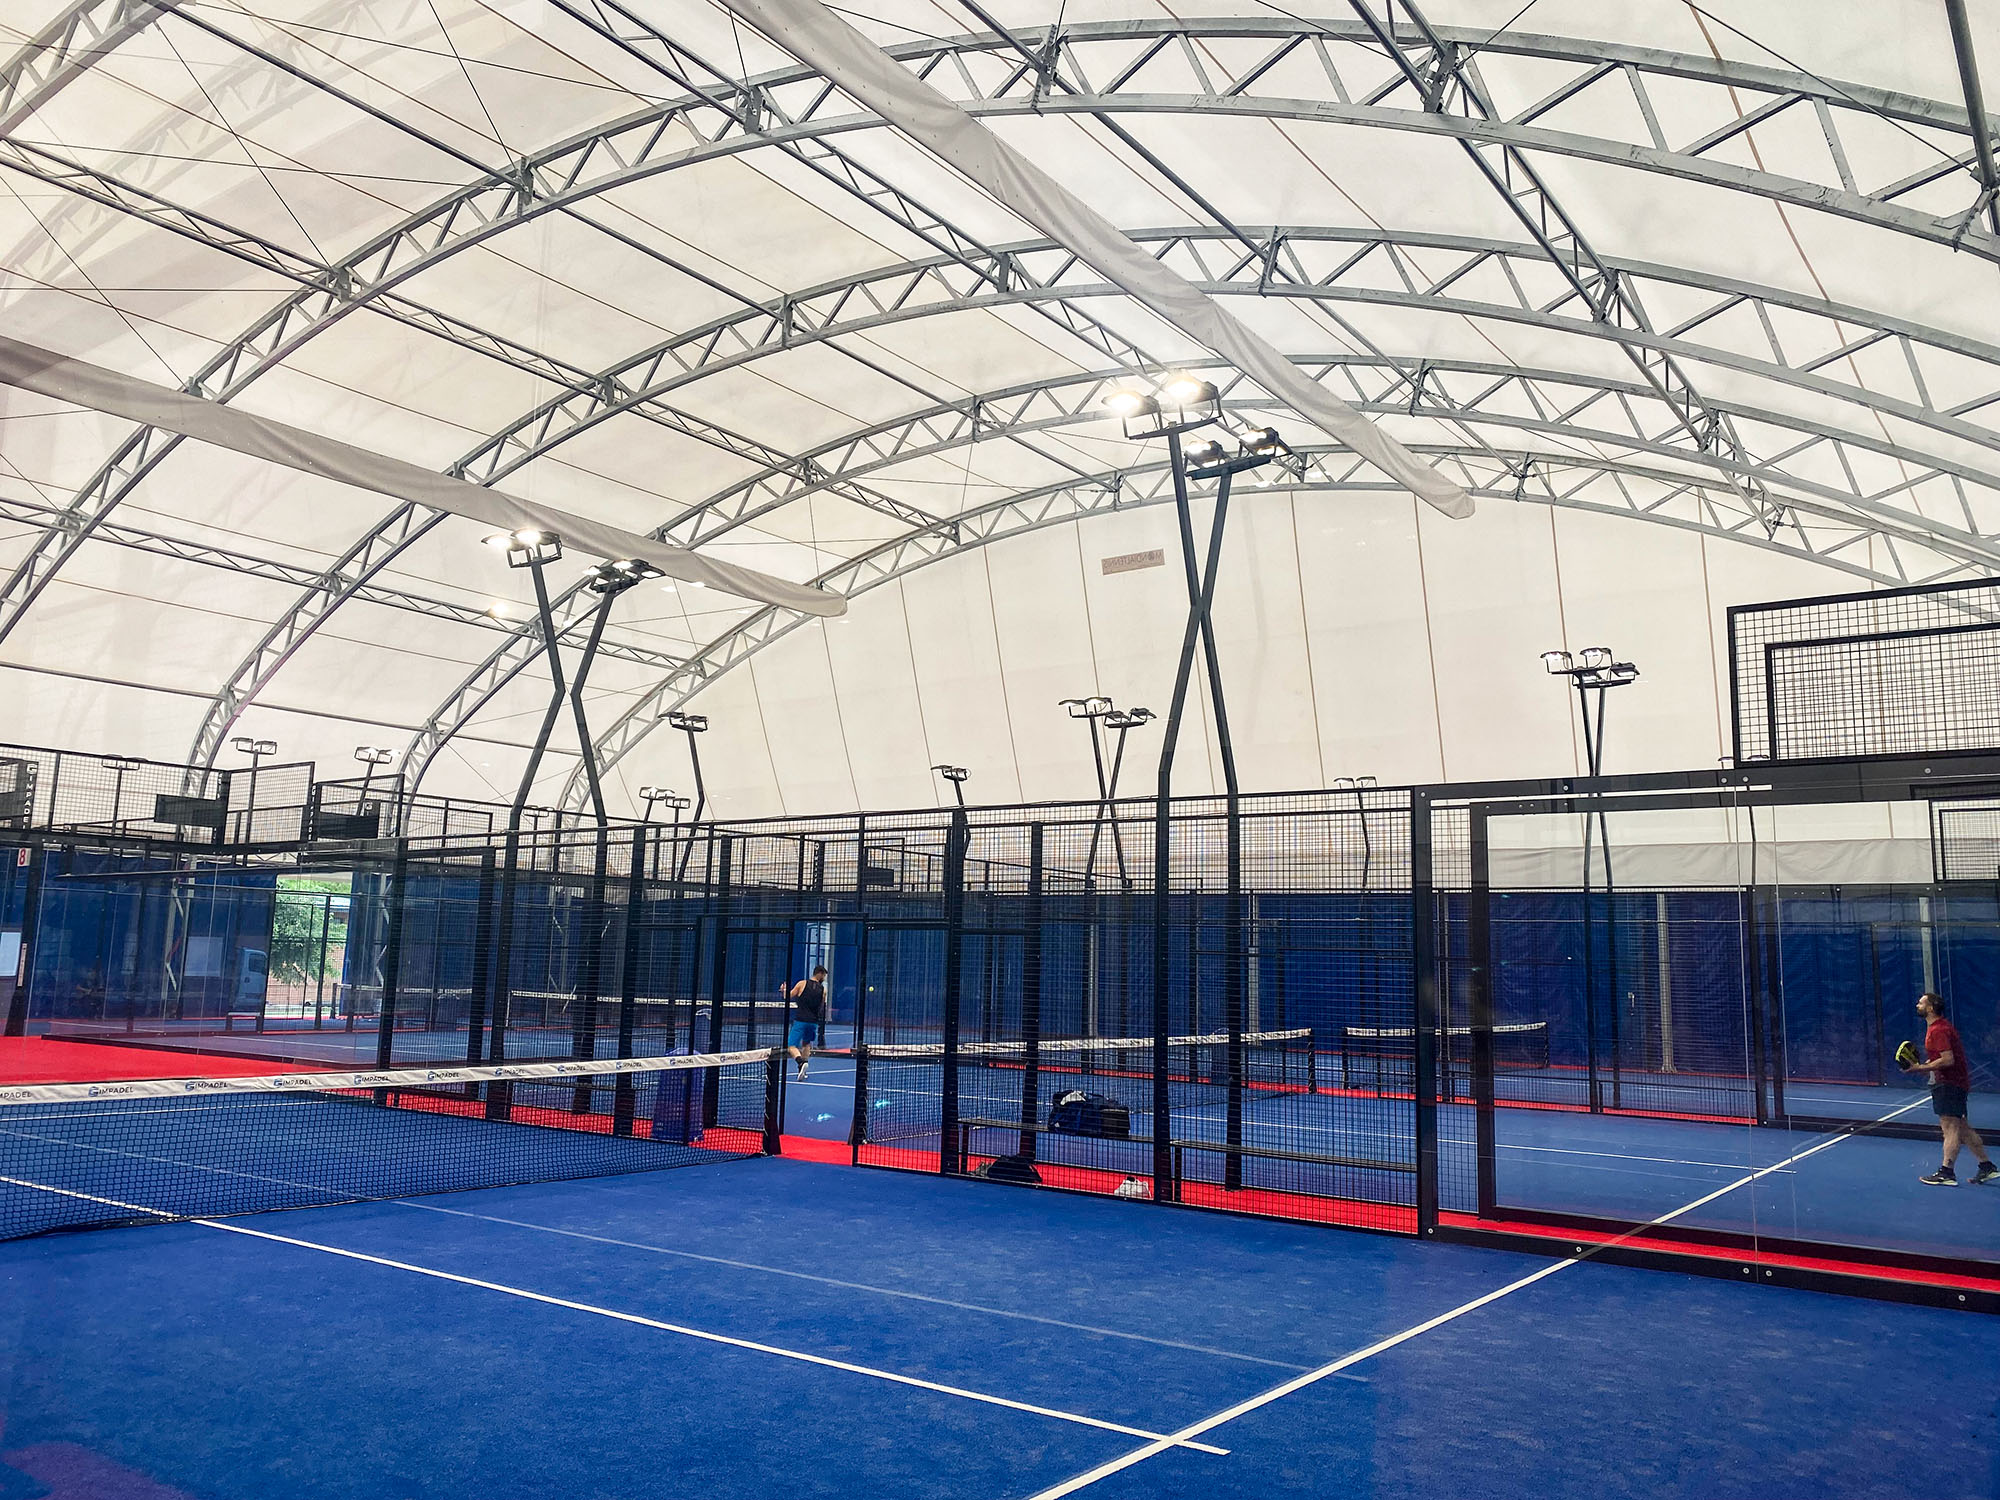 Move Aside Golf, Padel Could Be Best for Business